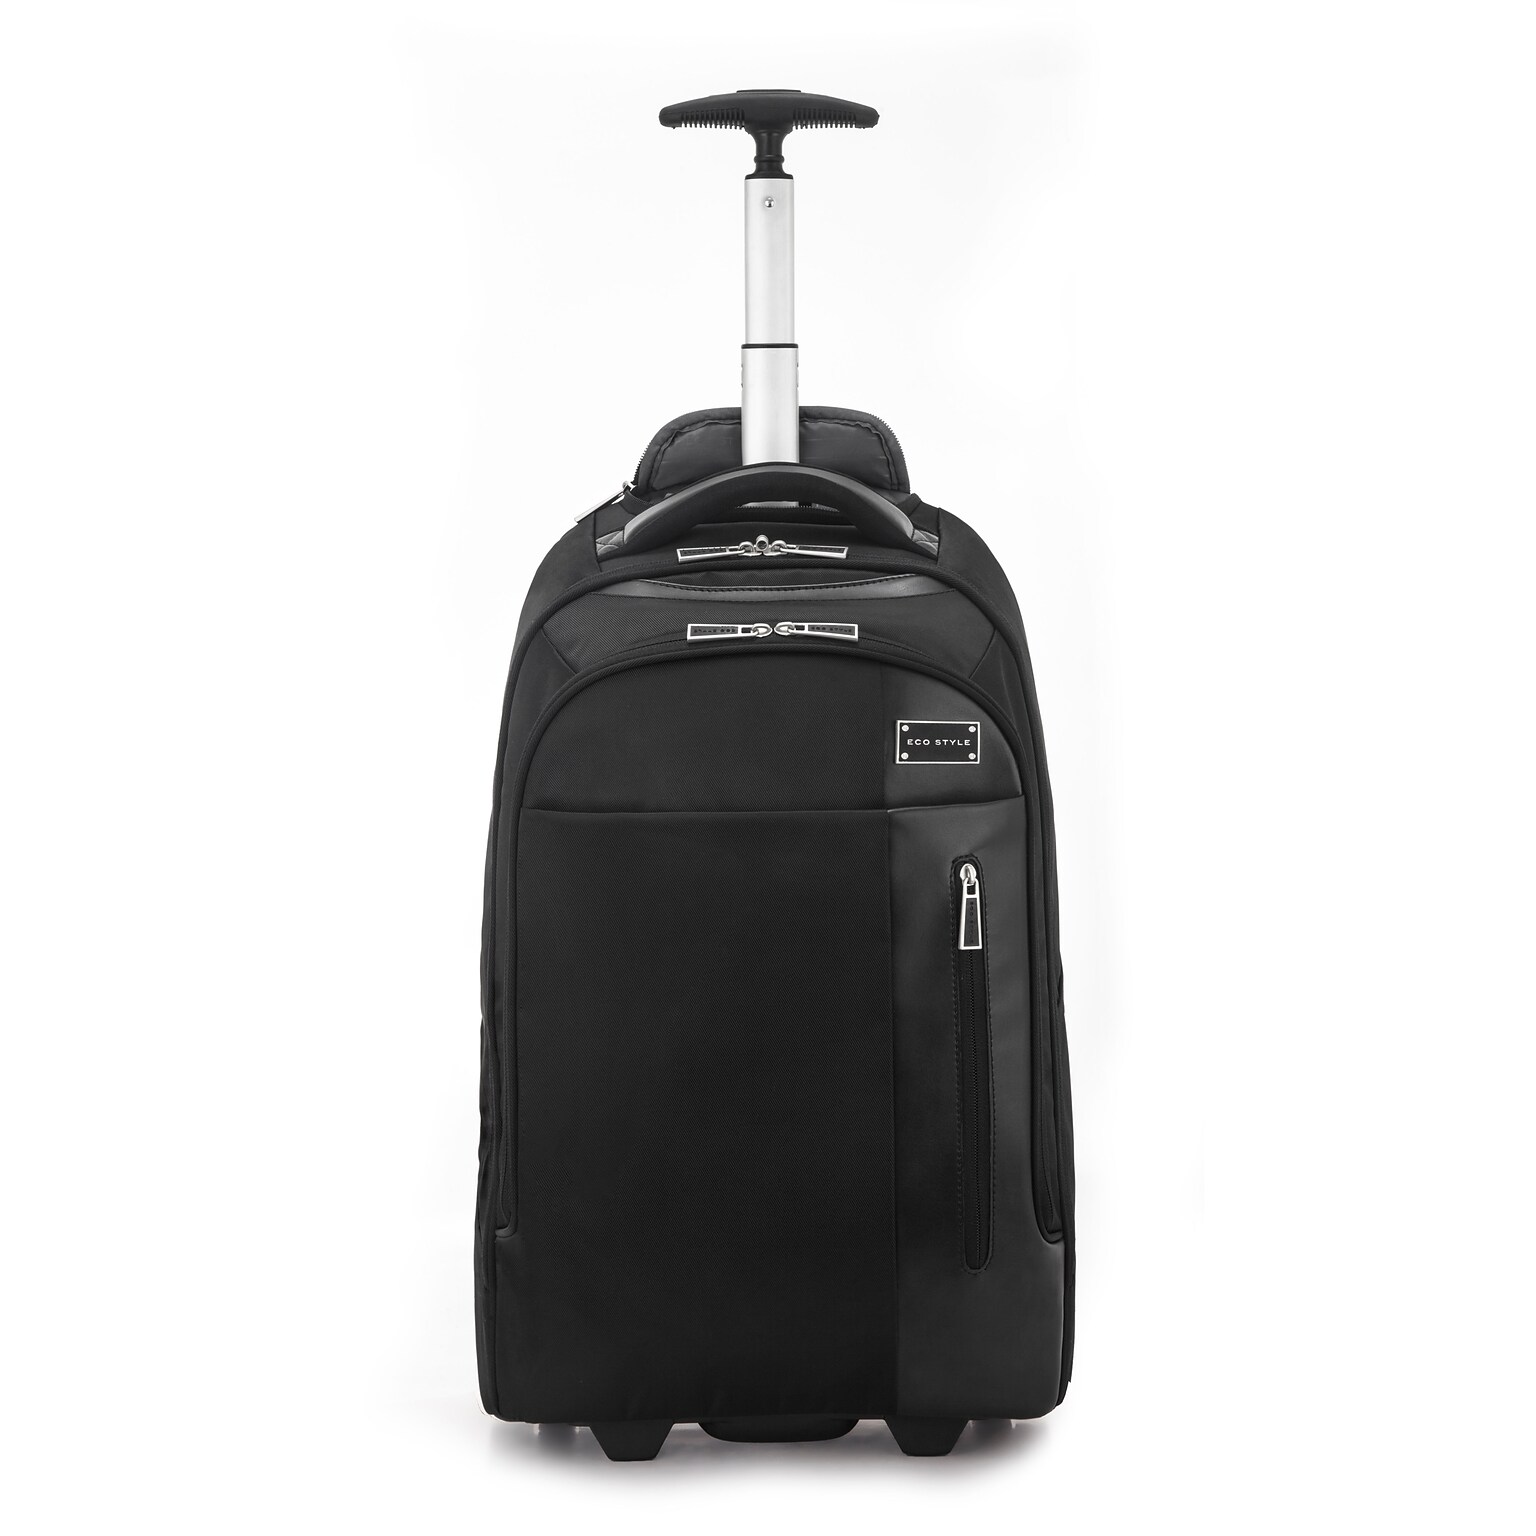 Eco Style Tech Executive Rolling Backpack for 17 Laptop, Black (ETEX-RB17)